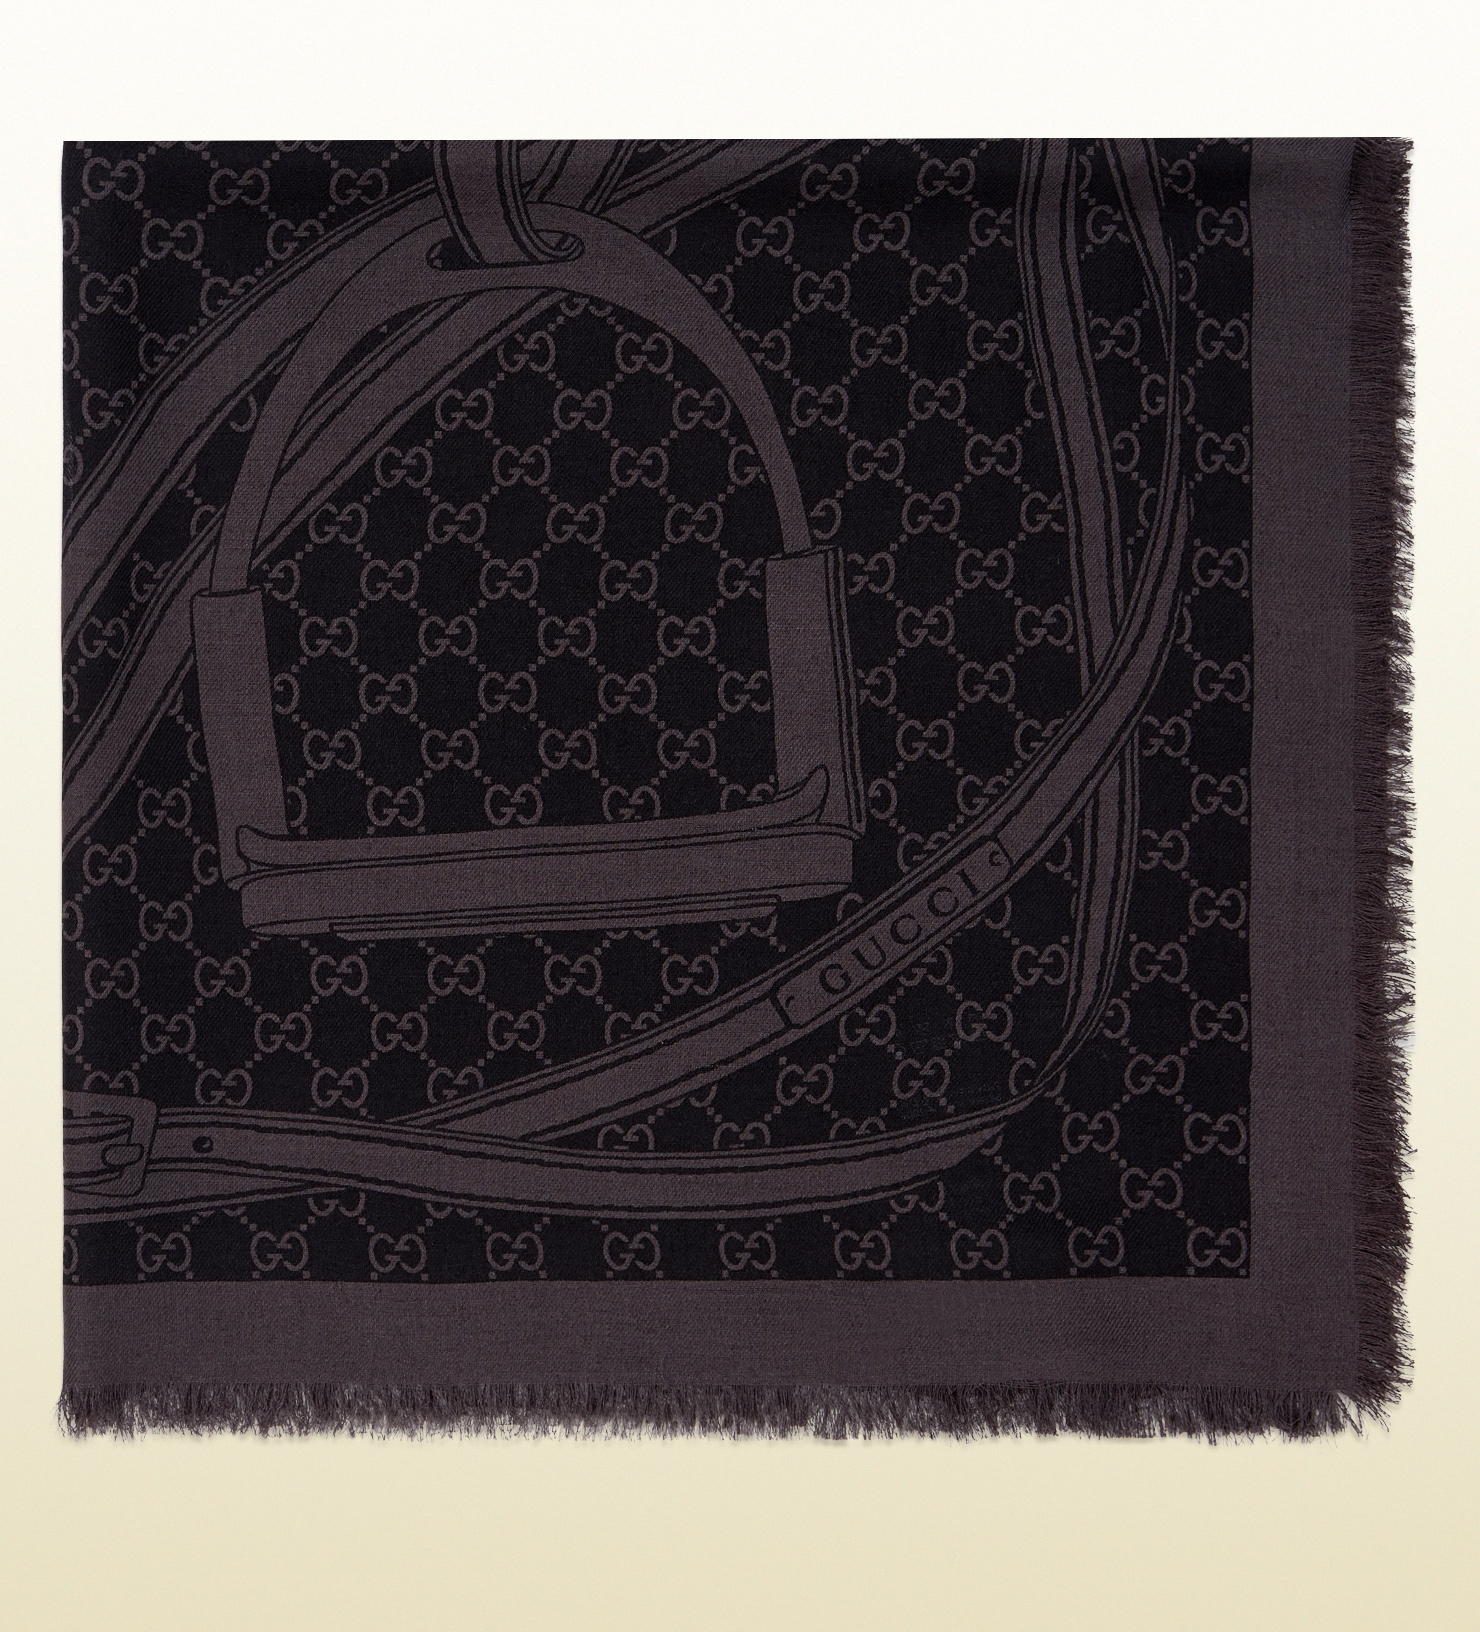 Gucci Gg Pattern Jacquard Stole in Brown | Lyst